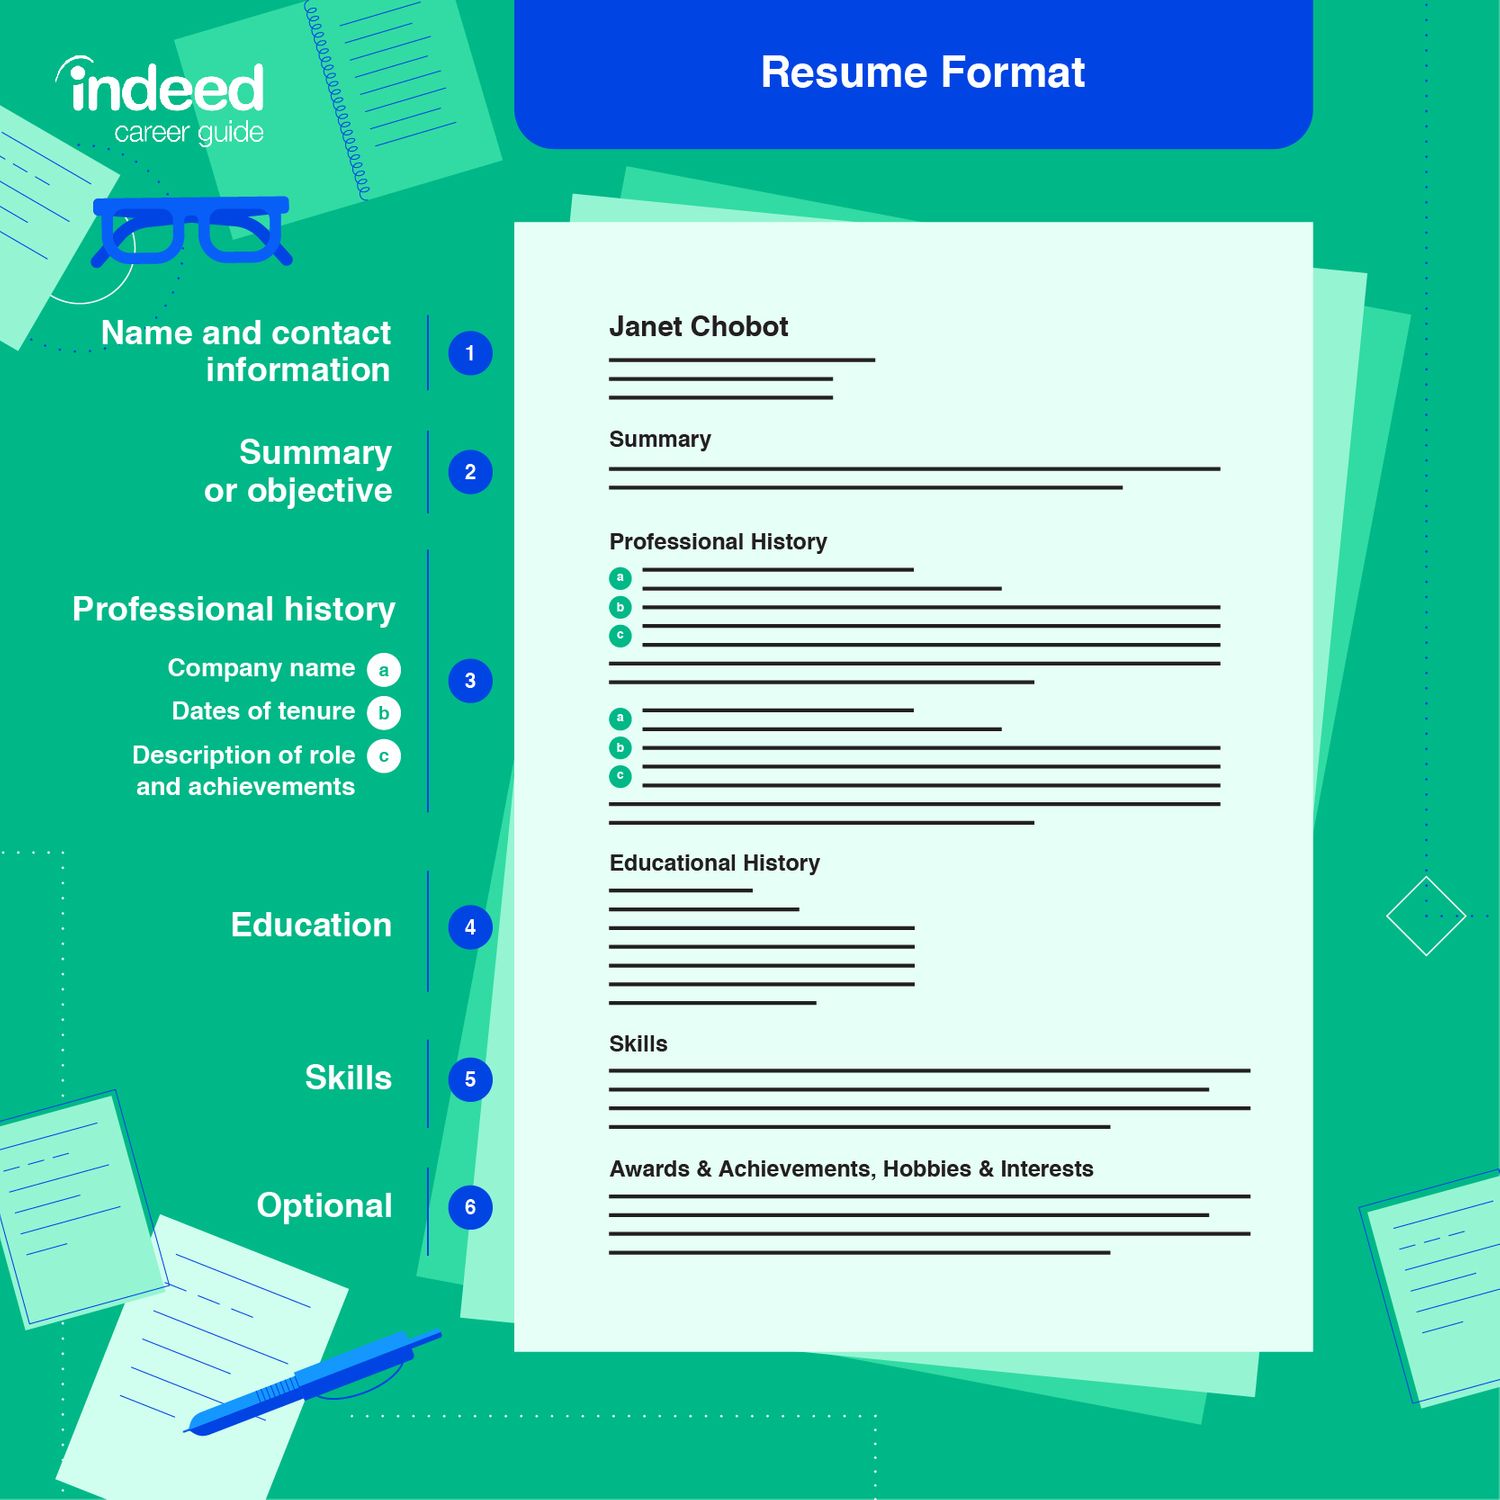 RN Resume Objectives: Definition, Tips and Examples